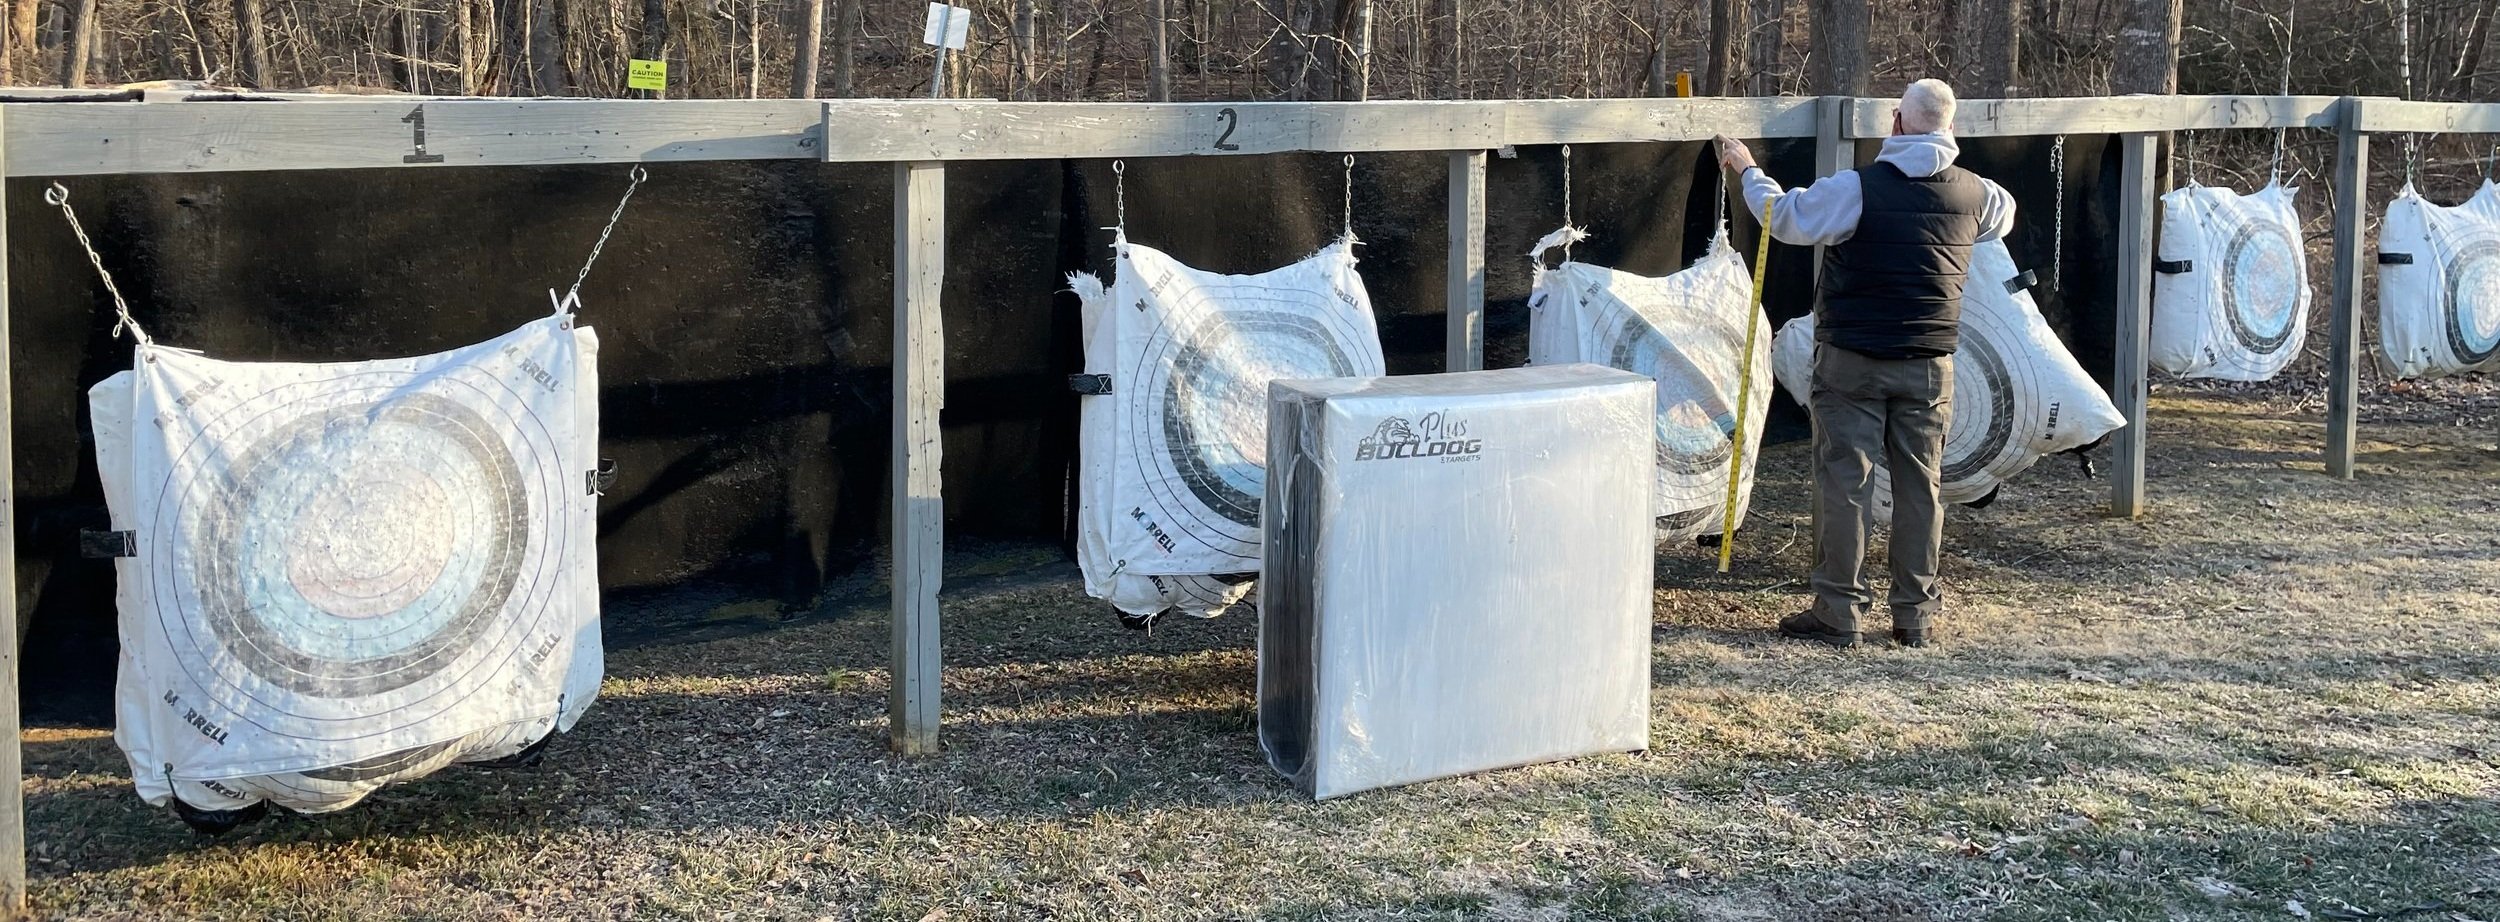   WPOA’s Dennis Inscoe designed and built the frames for the new targets at Rodes Farm.  